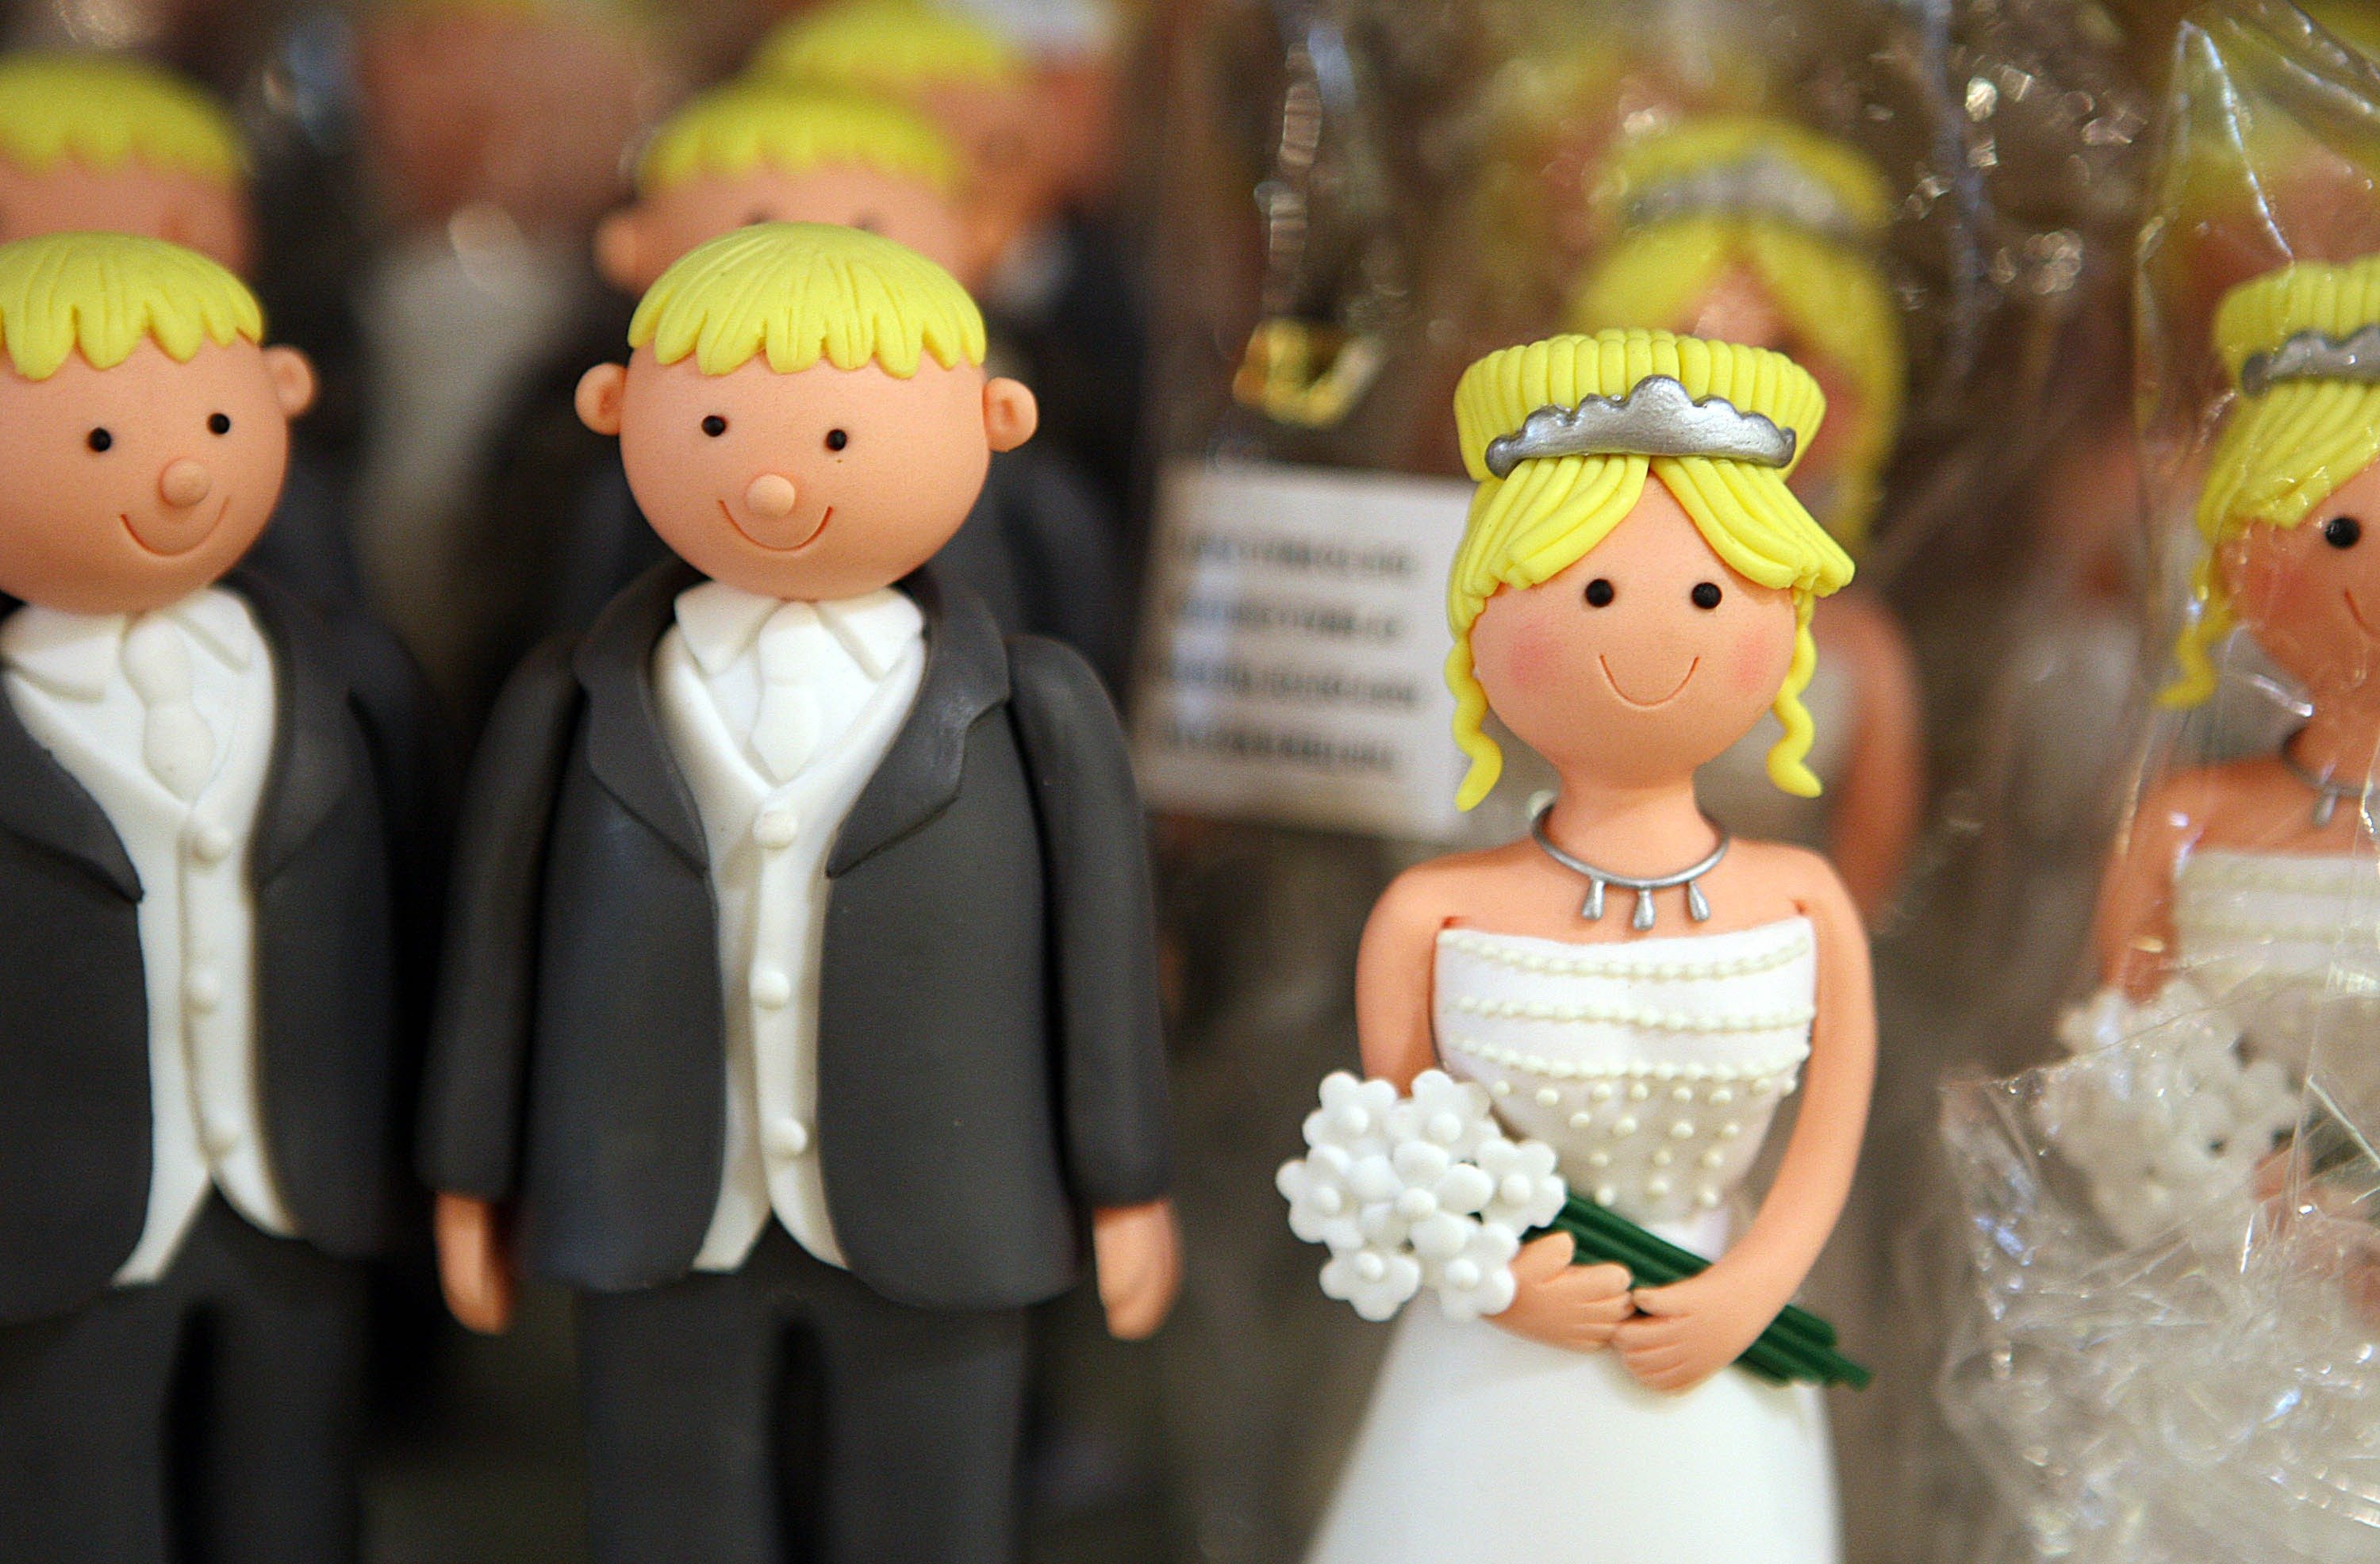 A bride wedding cake topper with two groom figures, similar to the arrangement on the new TLC show 'Seeking Brokther Husband'